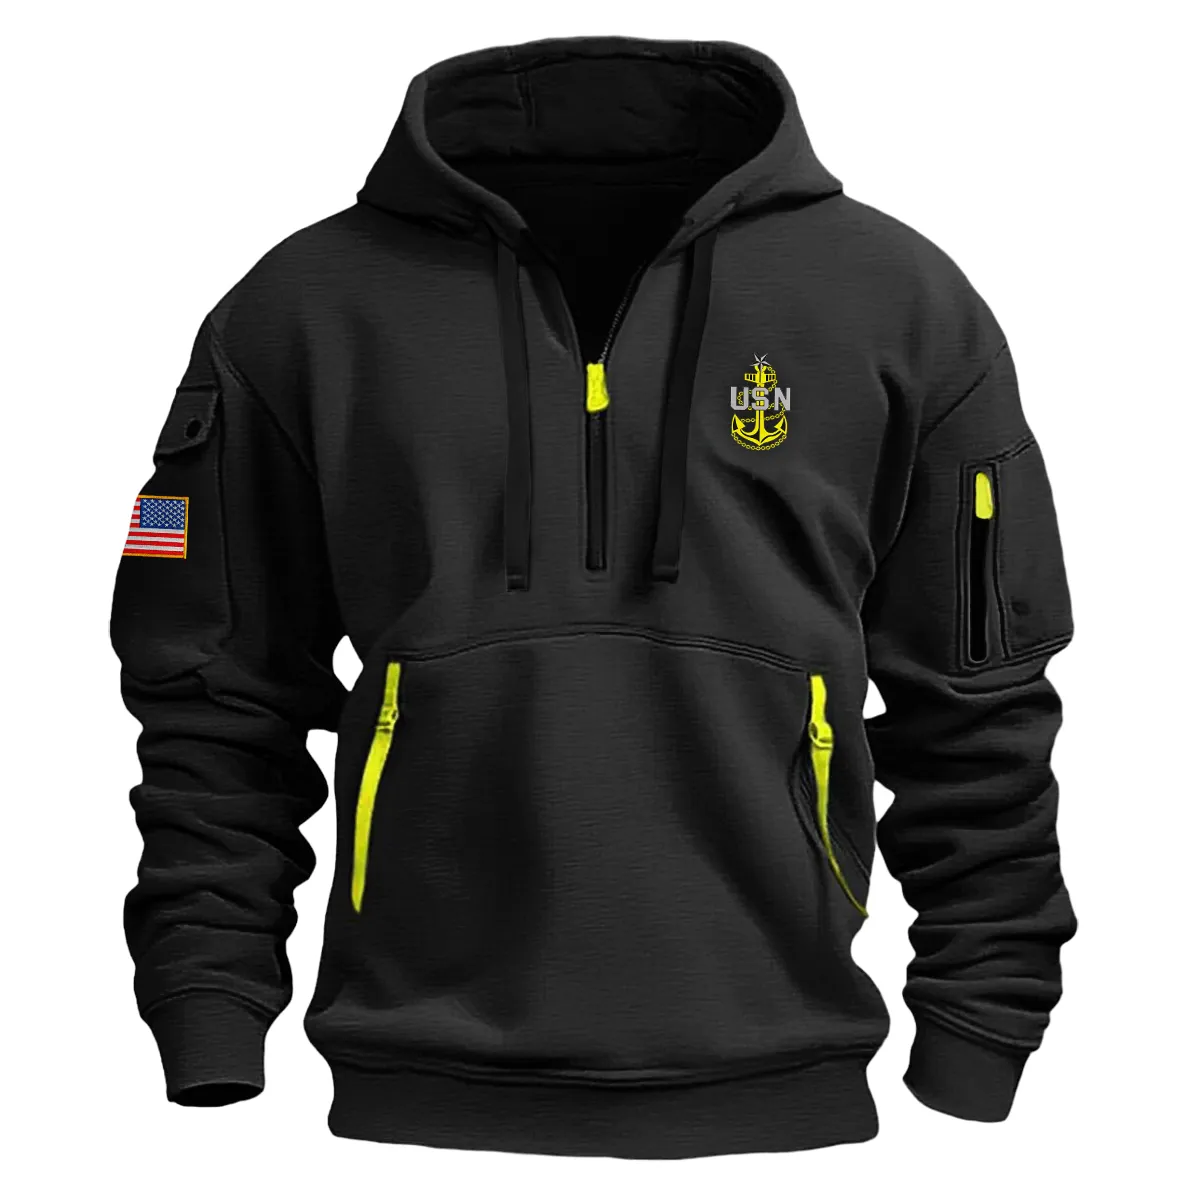 US Military All Branches! Personalized Gift U.S. Seabee Fashion Hoodie Half Zipper